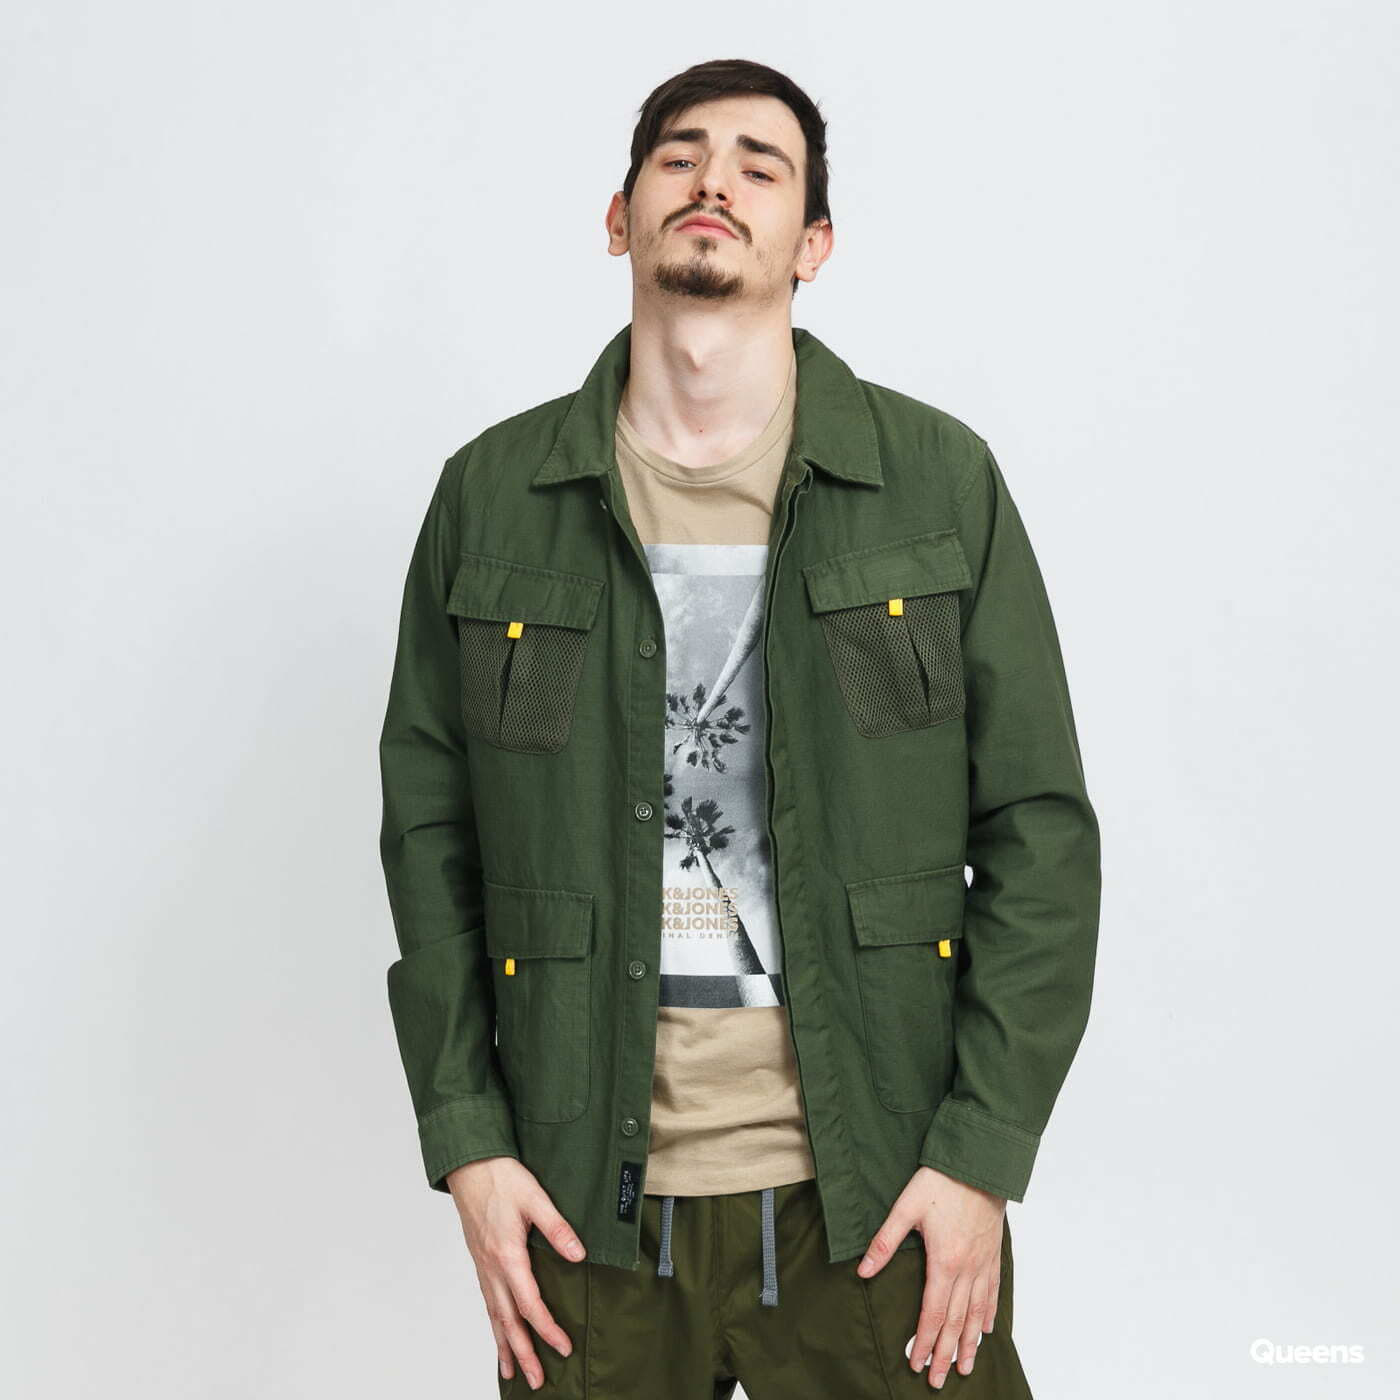 Jackets The Quiet Life Military Mesh Shirt Jacket Olive